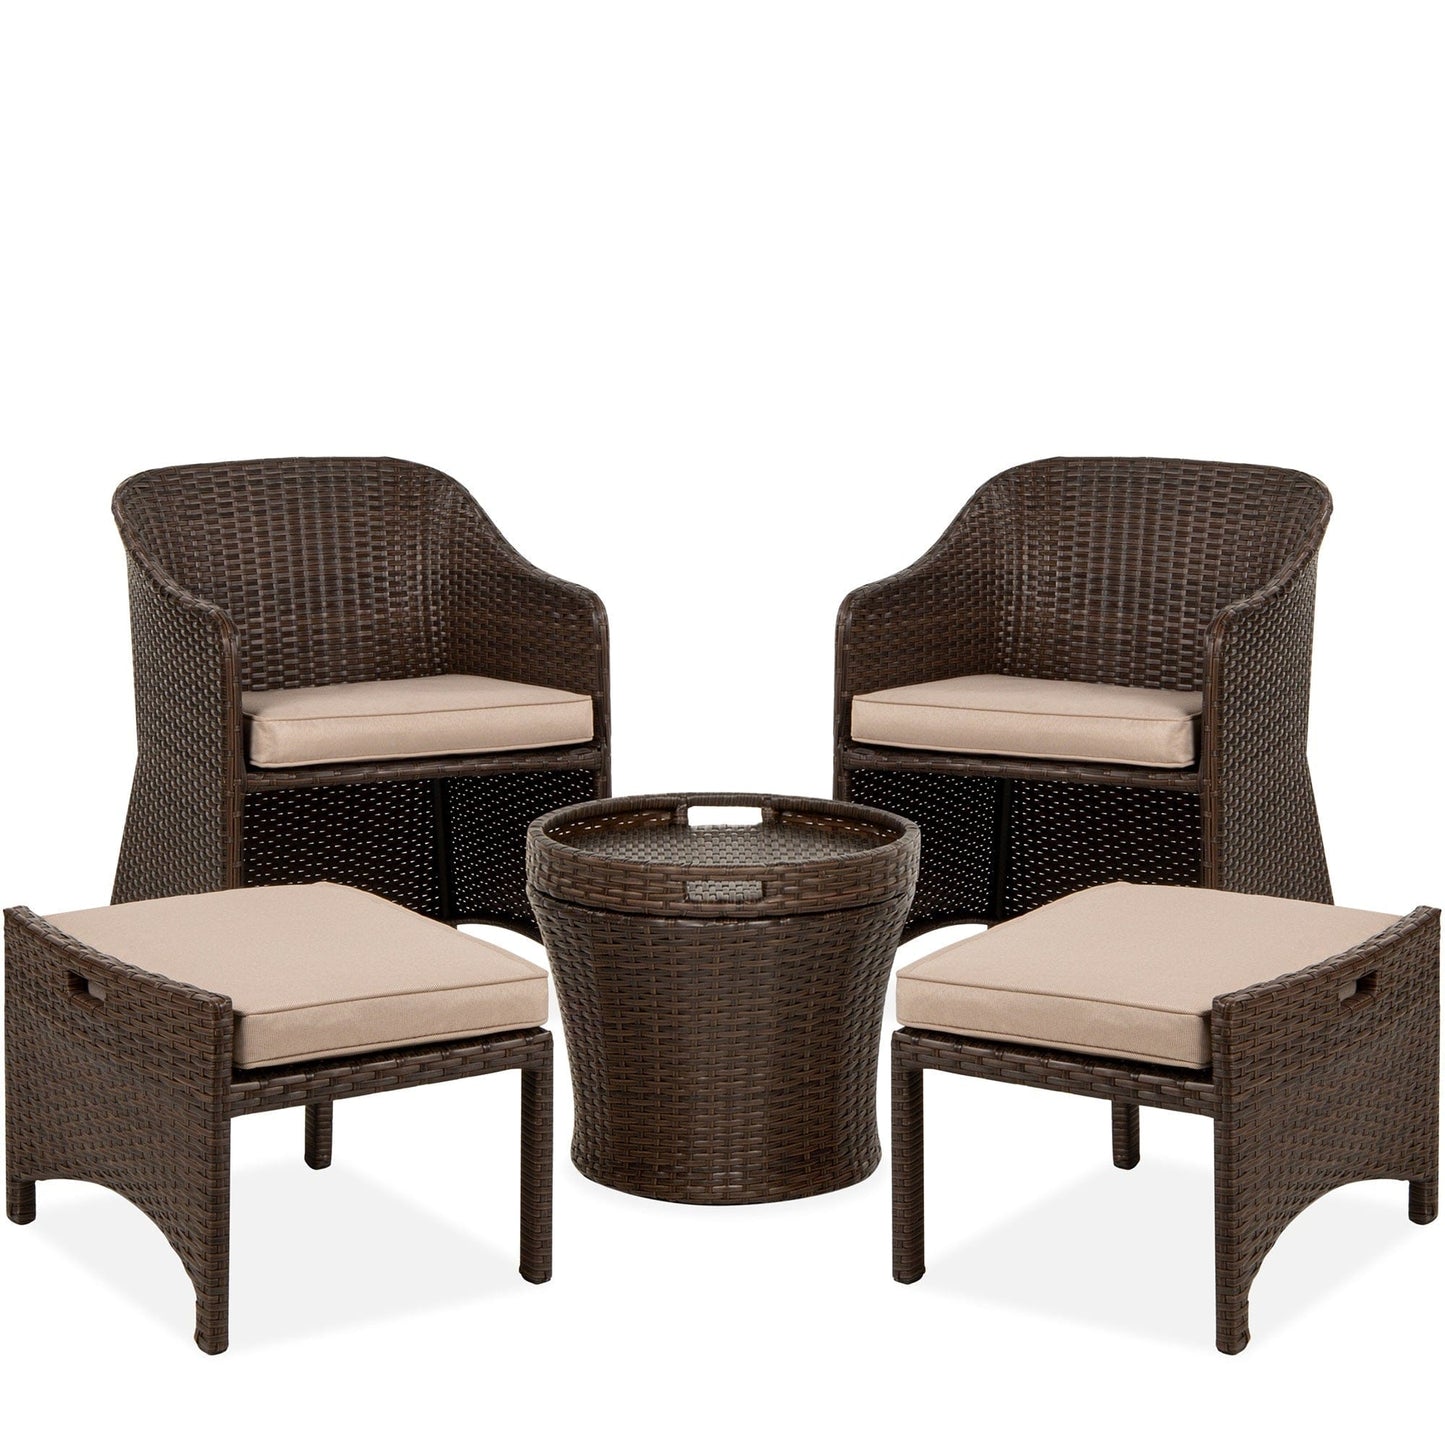 Dreamline Outdoor Garden/Balcony Patio Seating Set 1+2, 2 Chairs 2 Ottoman And Table (Dark Brown)